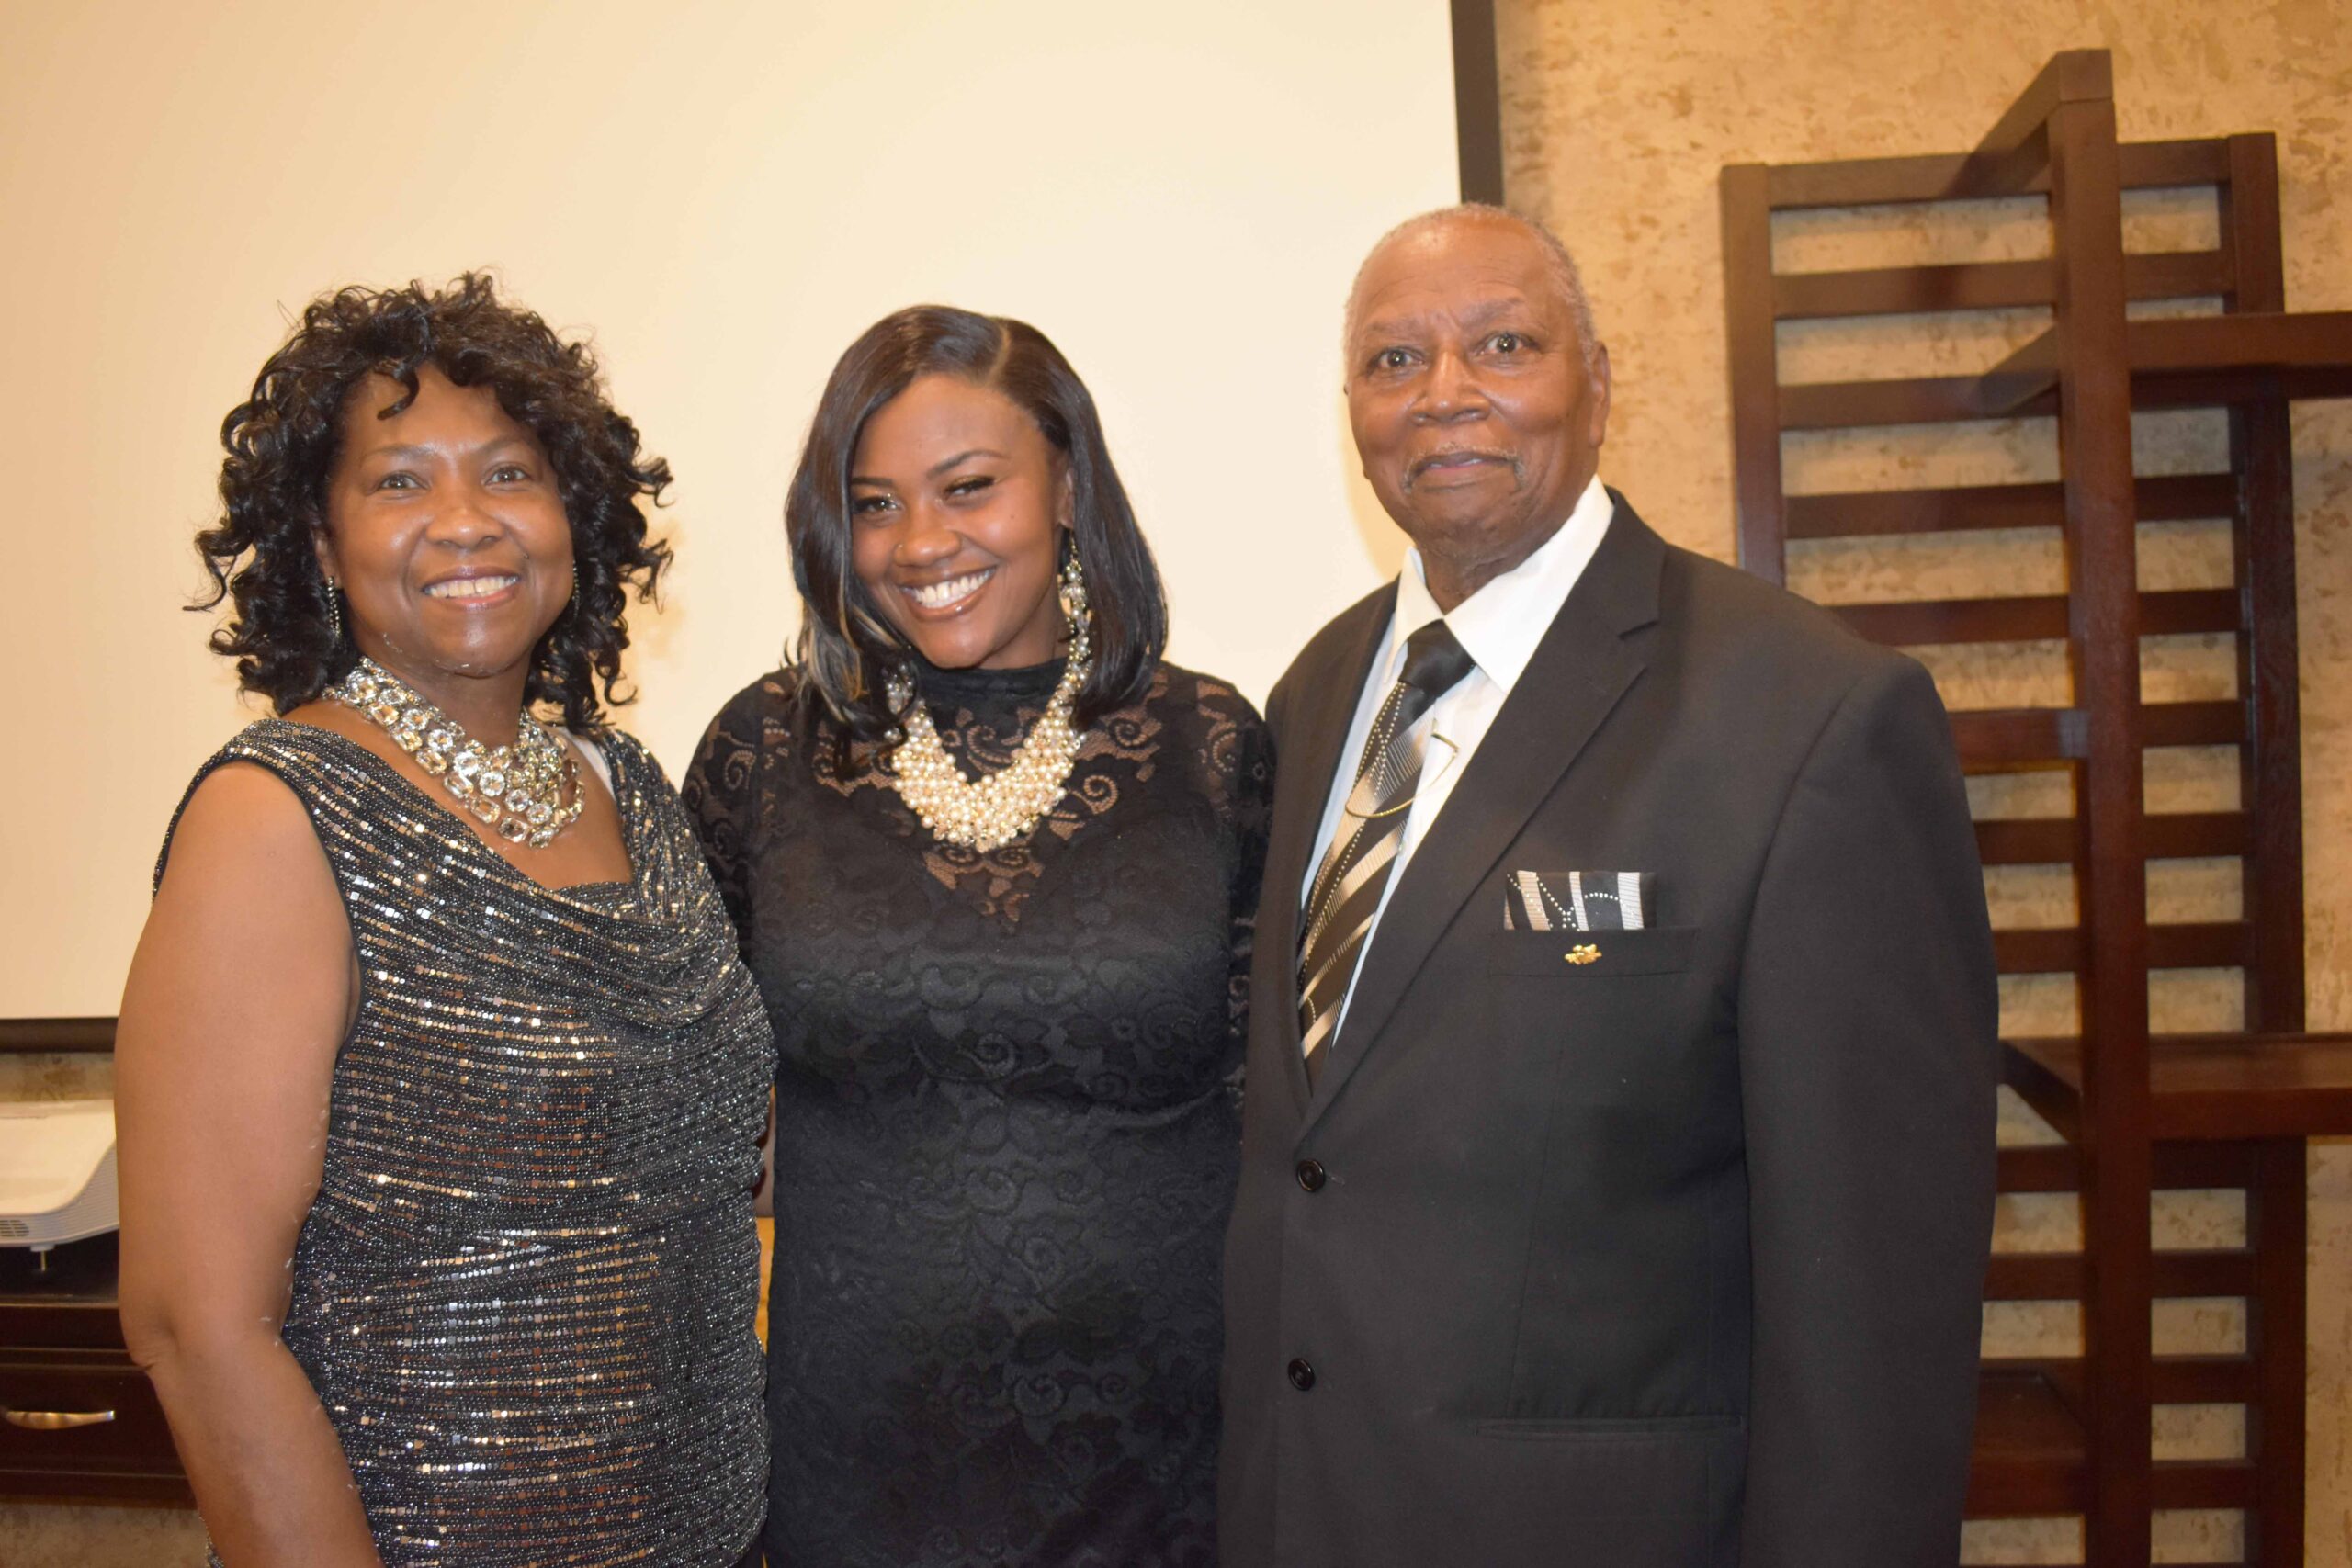 Mayor Tomekia Butler (center) with her sister and brother-in-law Dian and Rev. Albert Jones (all of Eudora)